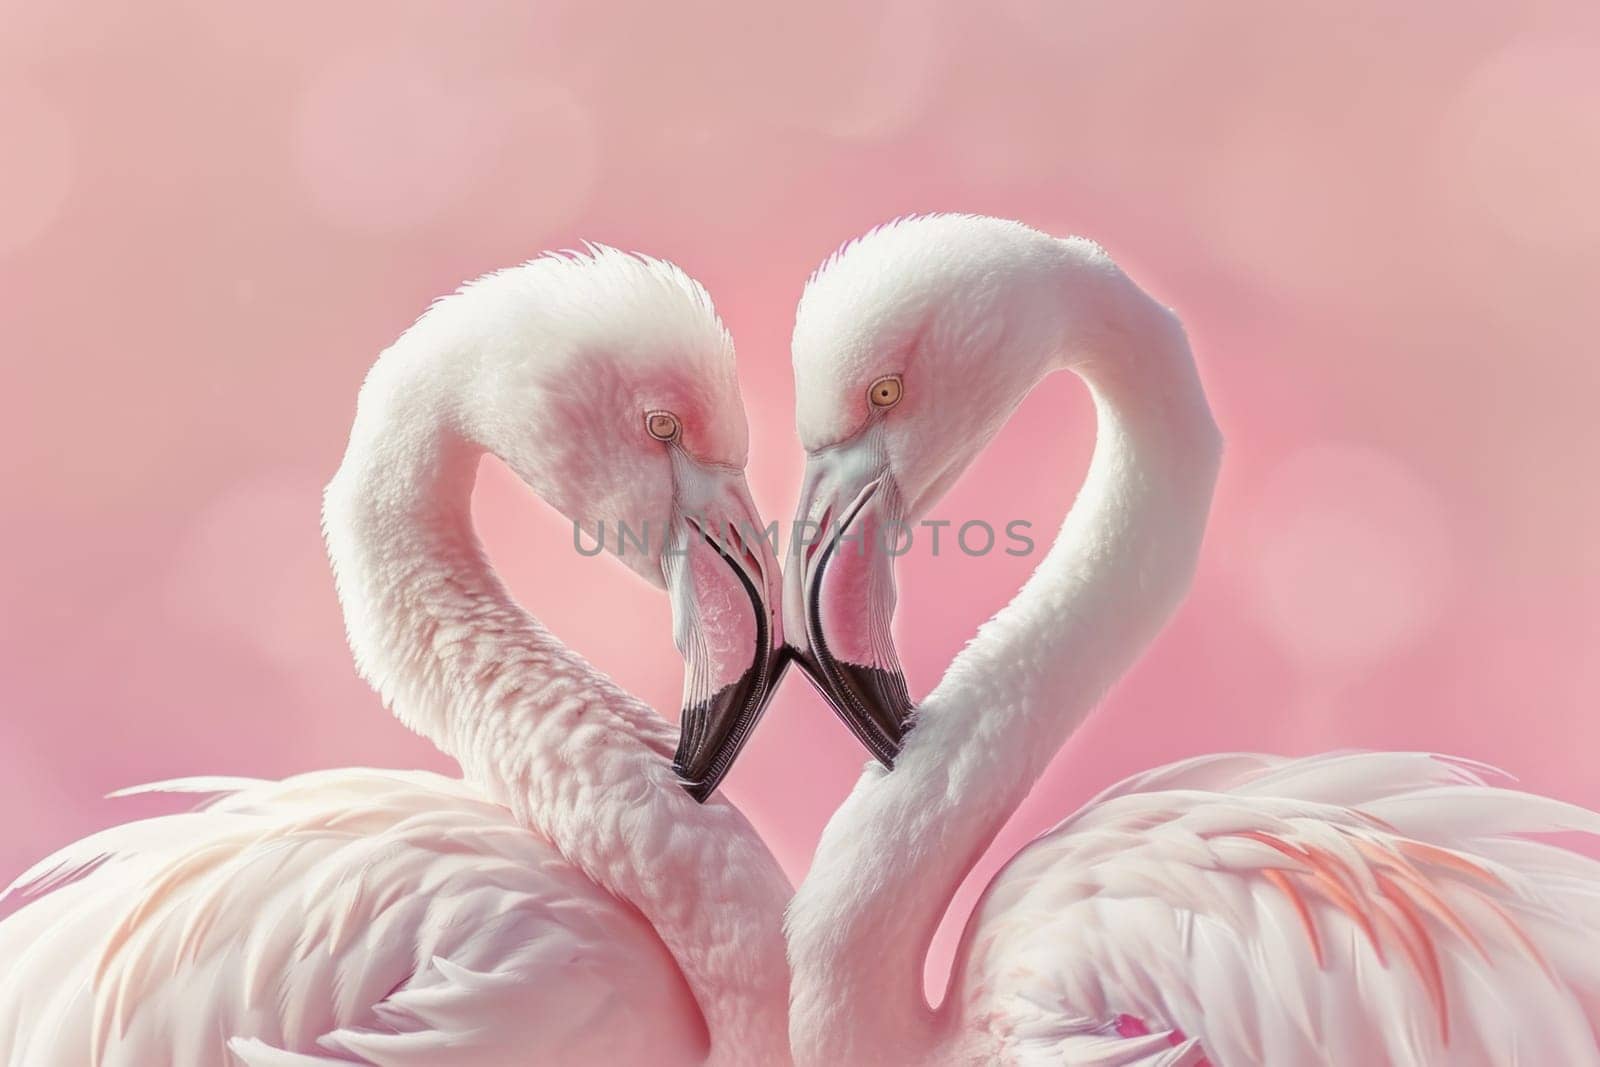 Romantic flamingos forming heart shape on pink background love, relationship, wildlife, nature, beauty concept